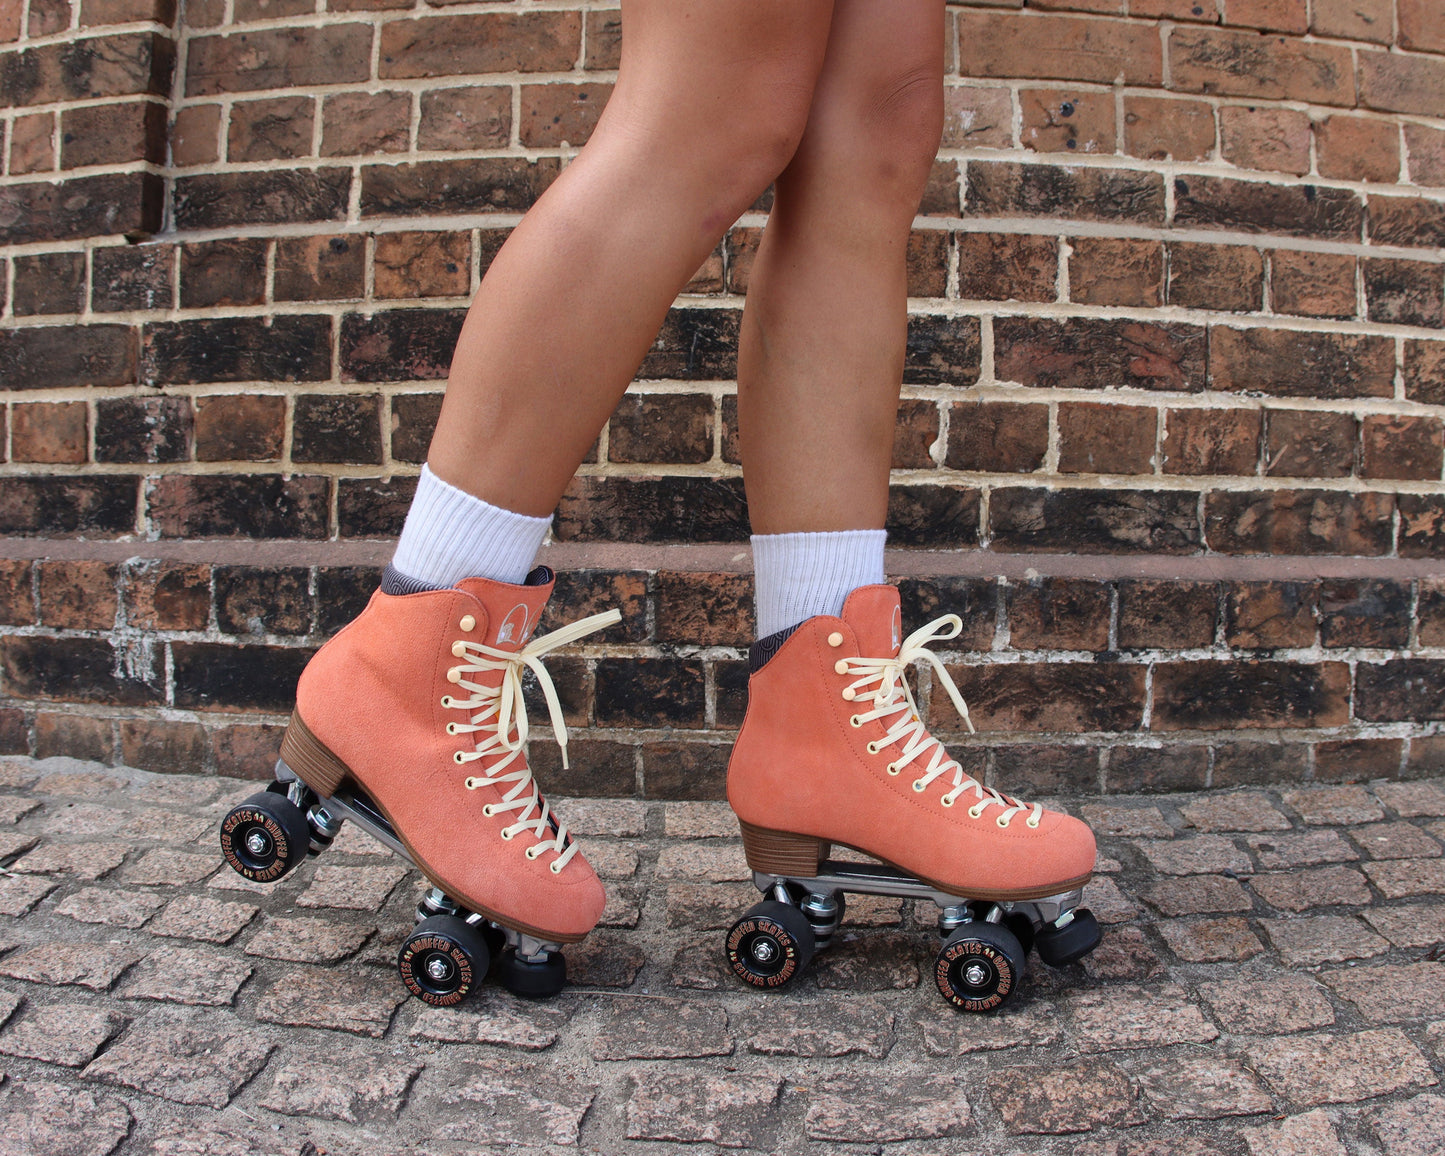 Chuffed Skates peach pink roller skates with brick background